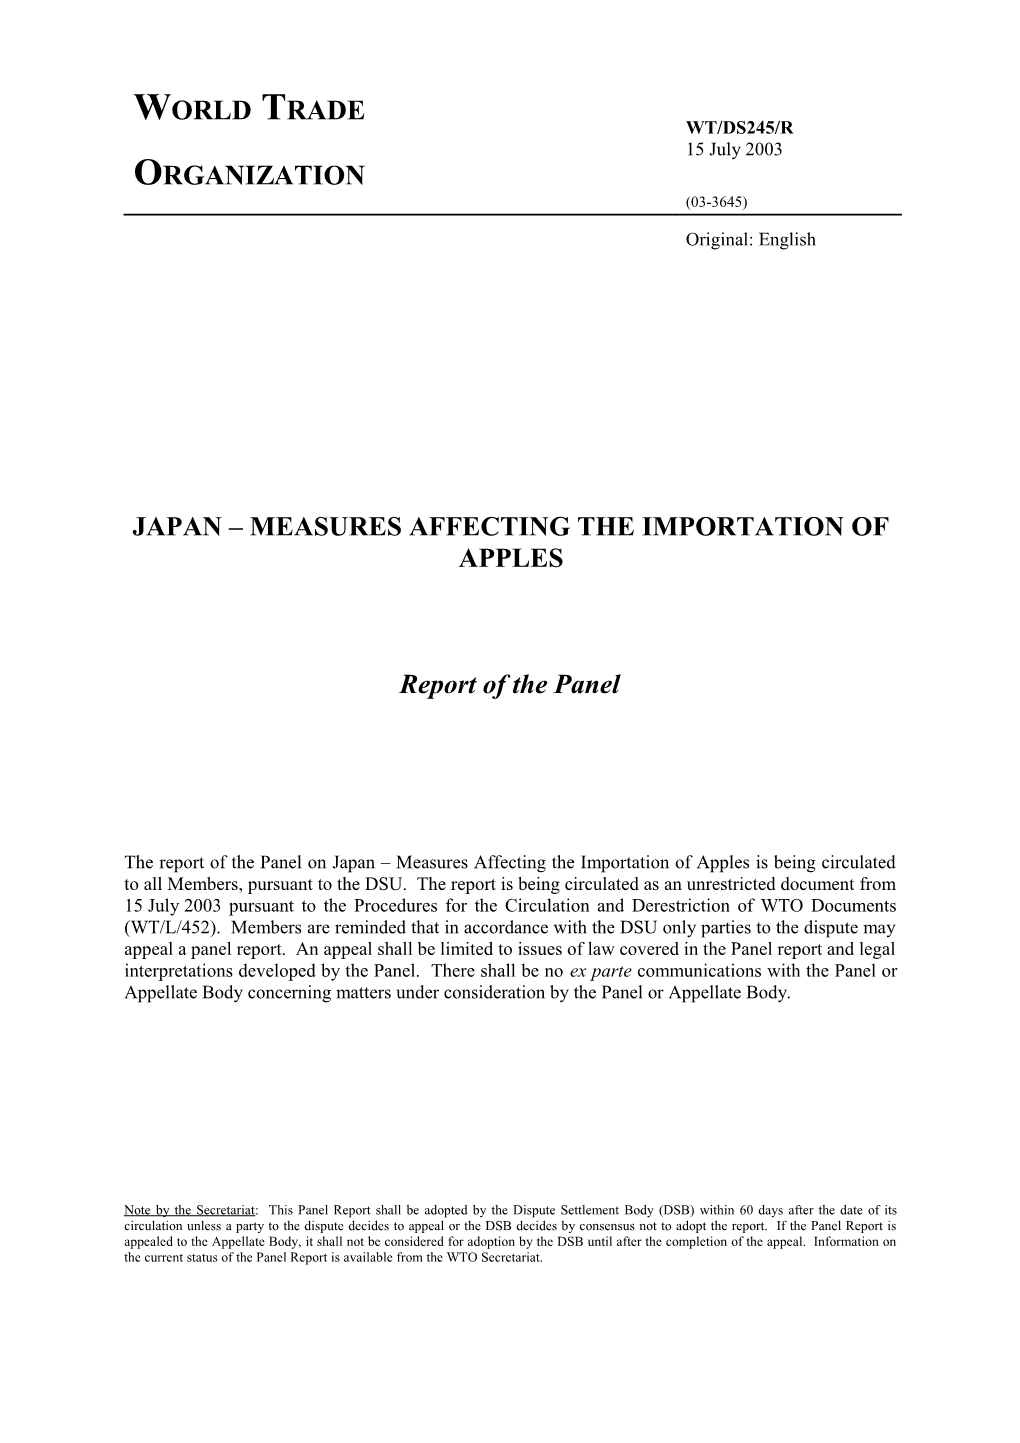 Japan Measures Affecting the Importation of Apples